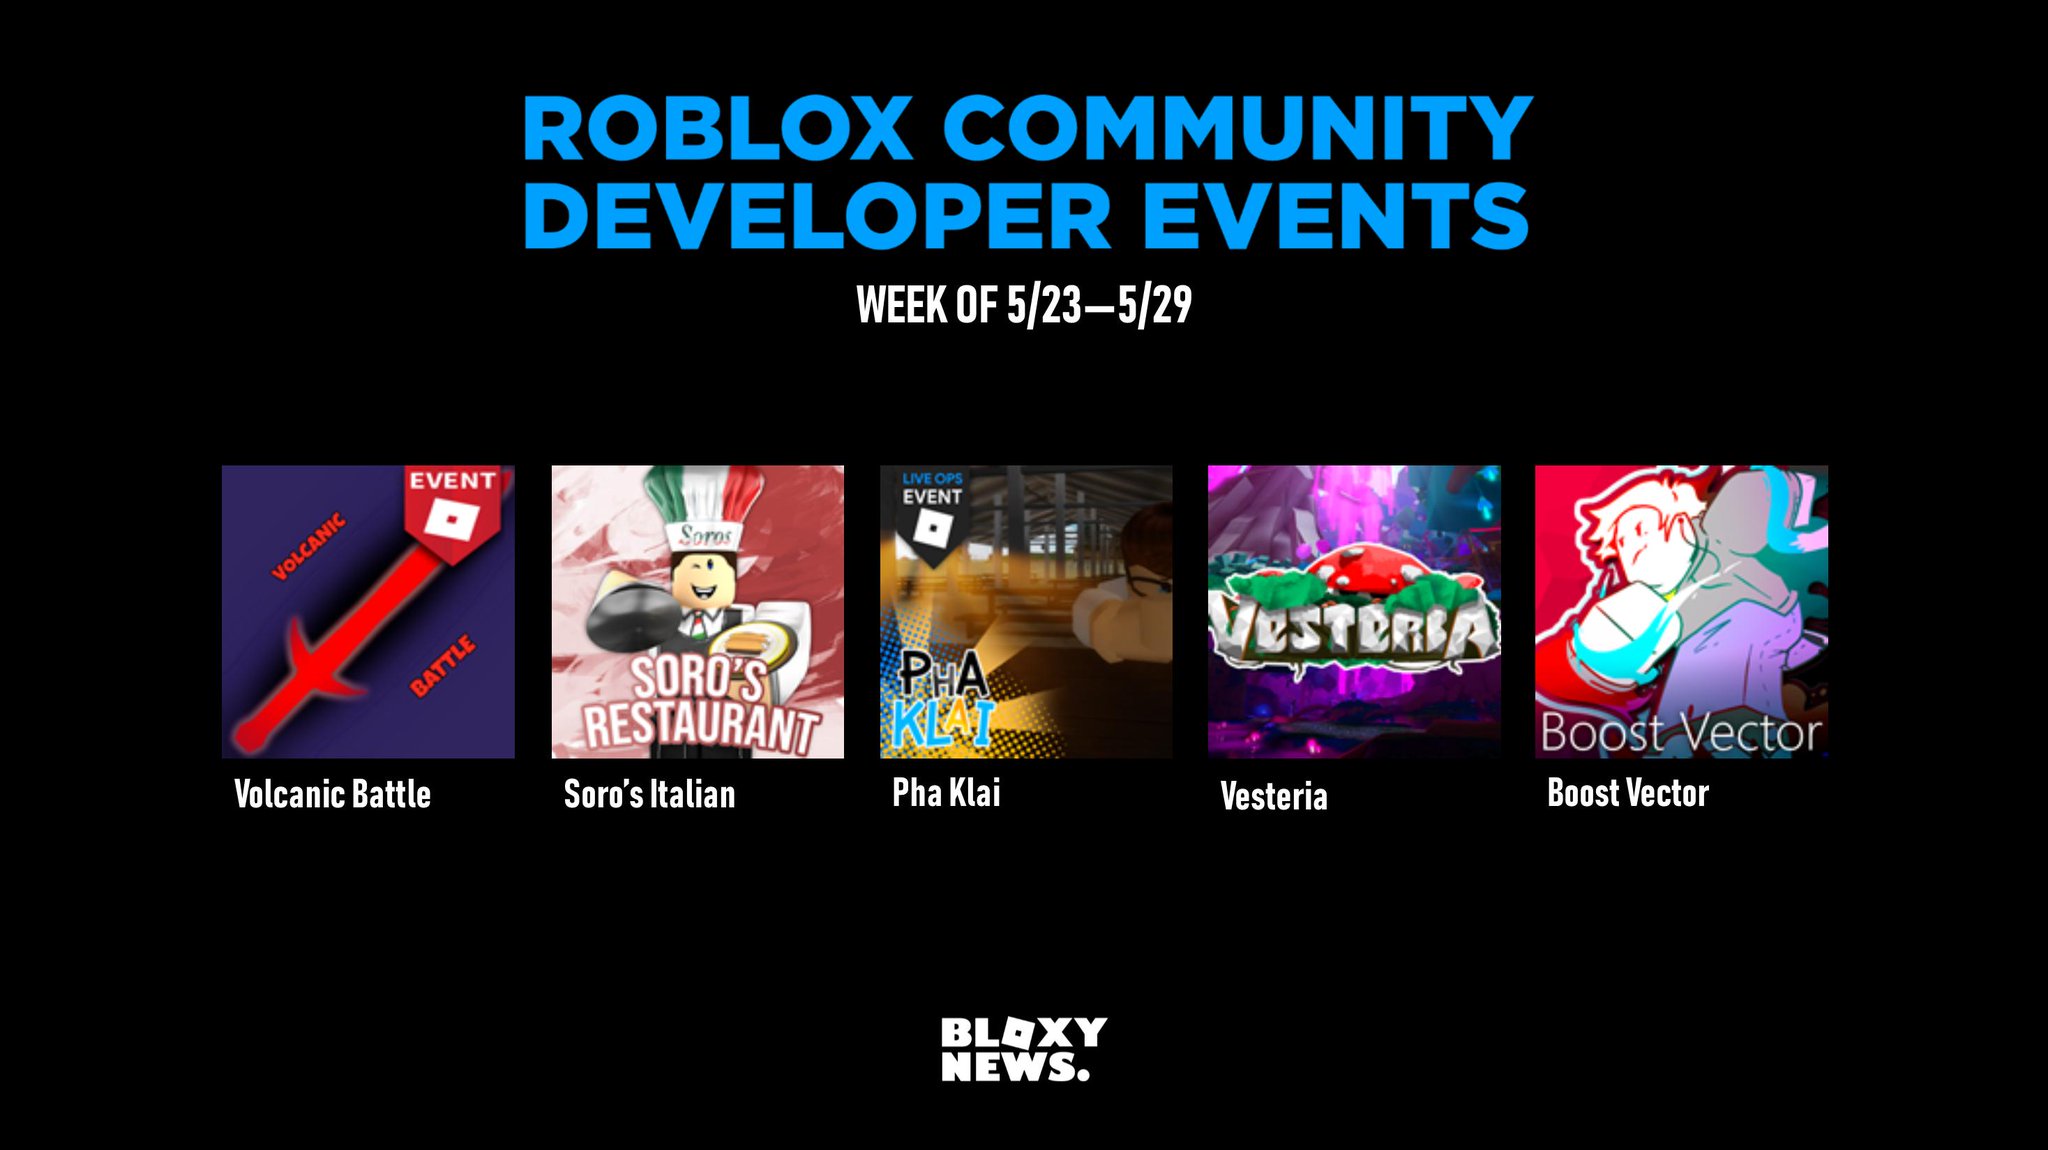 Bloxy News On Twitter Bloxynews This Weeks Robloxdev Live Ops Events Are Live Now Check Out The Quests And Play These Games For Yourselves At Https T Co Hqd8qaf6sw Https T Co Jvixyqj4qq - live ops event roblox